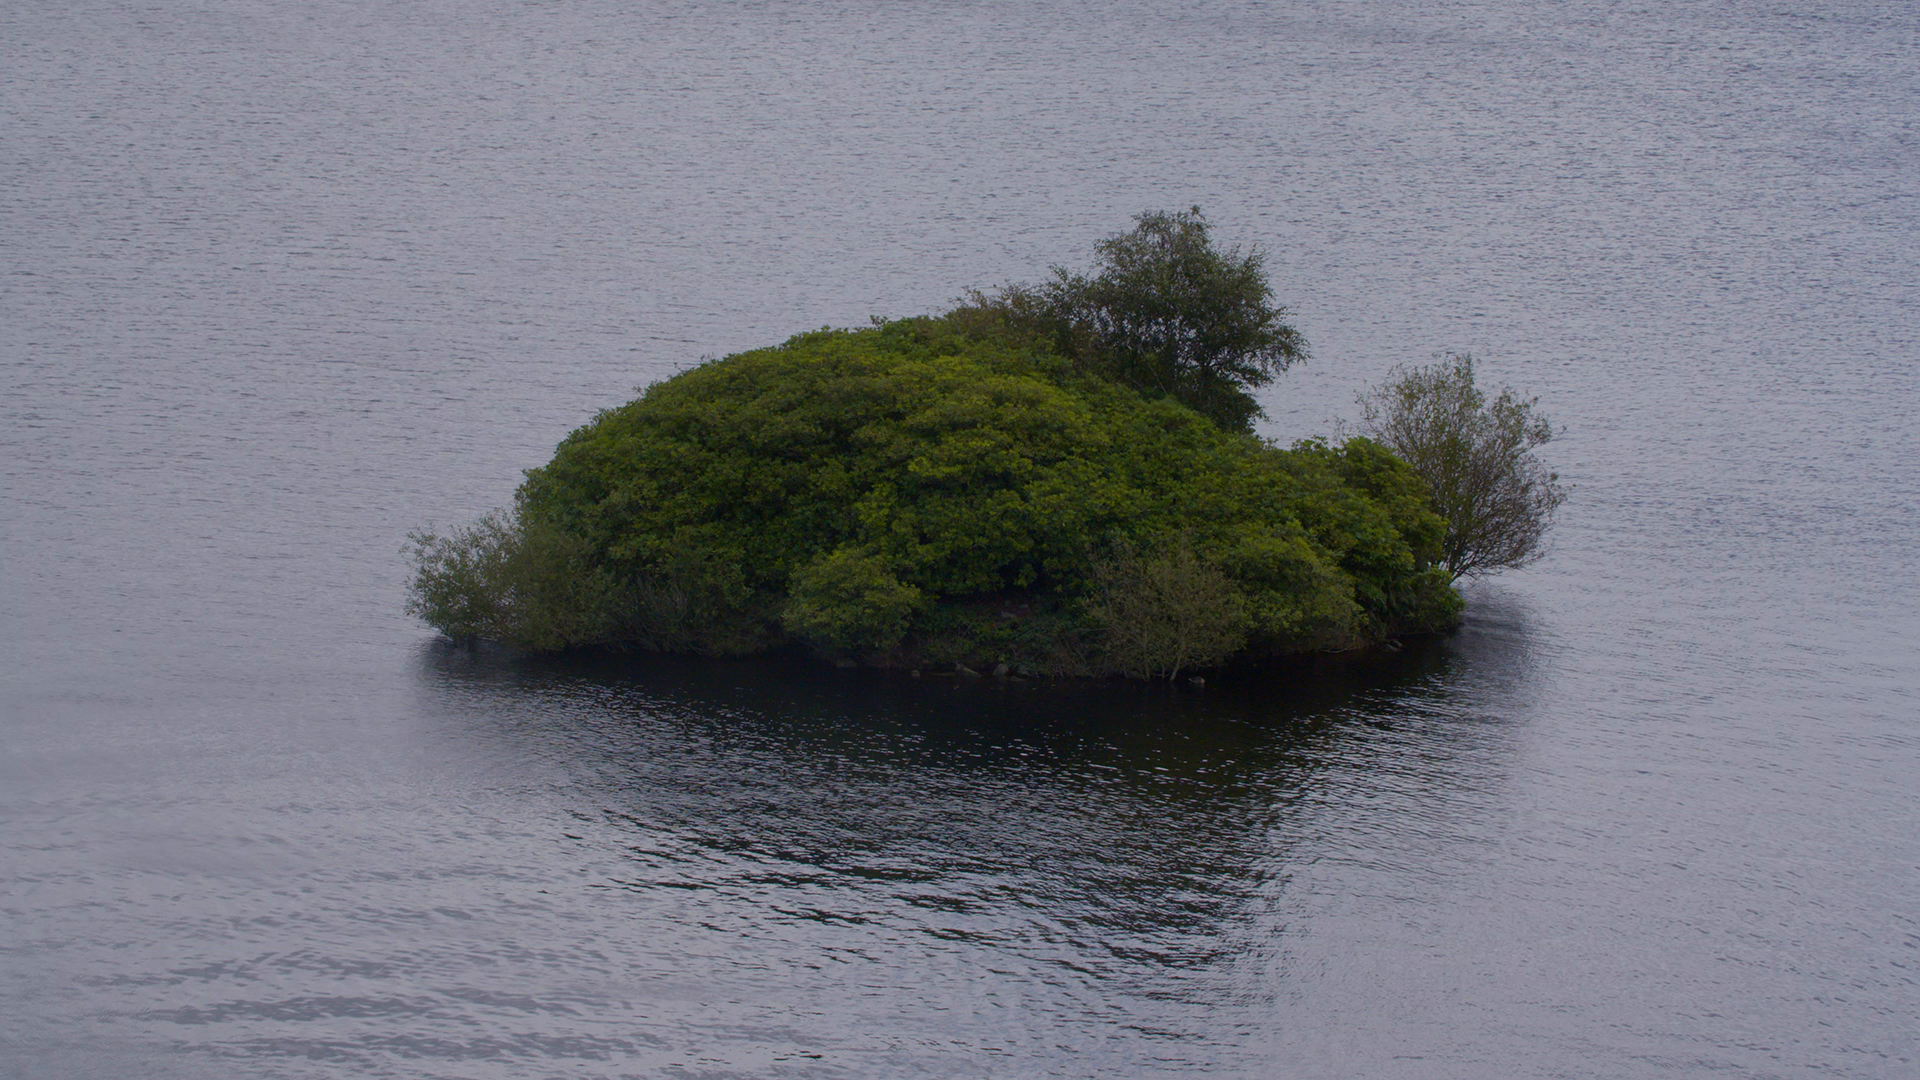 A photograph of a small island covered in green bushes in the middle of a body of water.